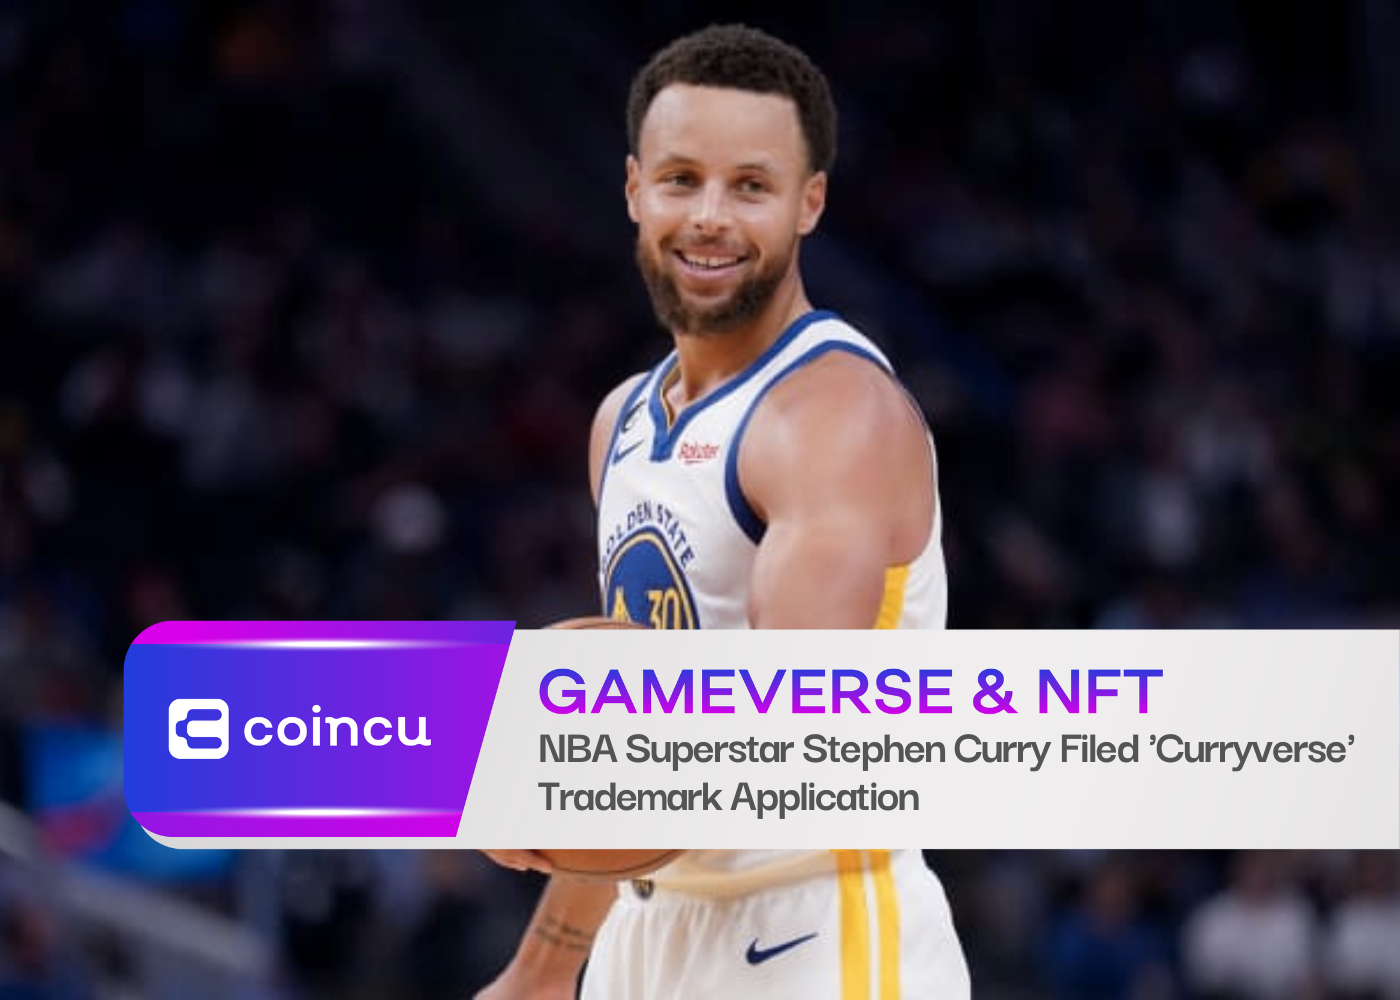 NBA Superstar Steph Curry Filed 'Curryverse' Trademark Application